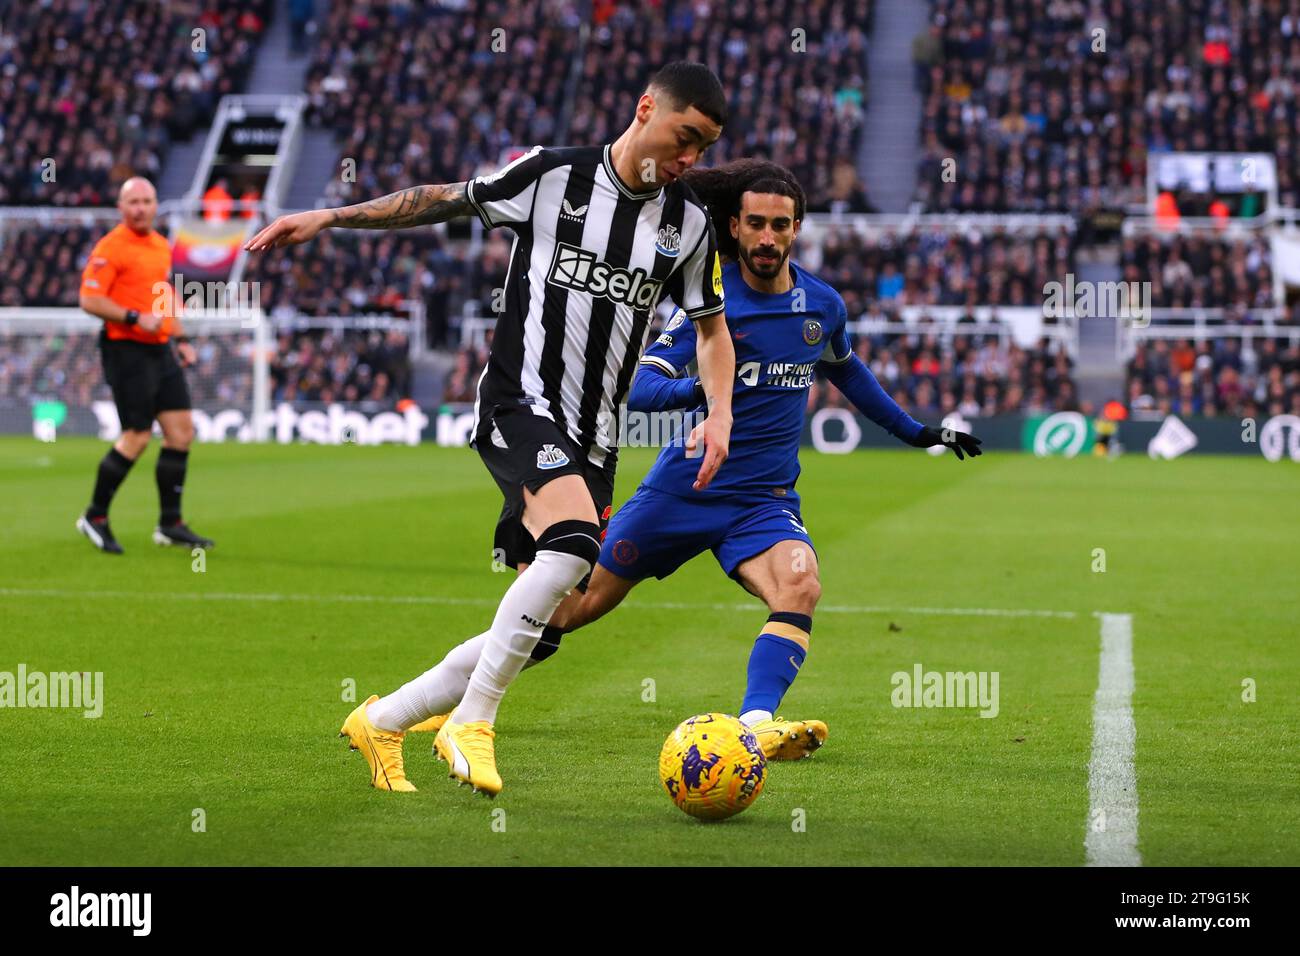 Newcastle, UK. 25th Nov, 2023. Miguel Almir-n #24 of Newcastle United defends possession during the Premier League match Newcastle United vs Chelsea at St. James's Park, Newcastle, United Kingdom, 25th November 2023 (Photo by Ryan Crockett/News Images) Credit: News Images LTD/Alamy Live News Stock Photo